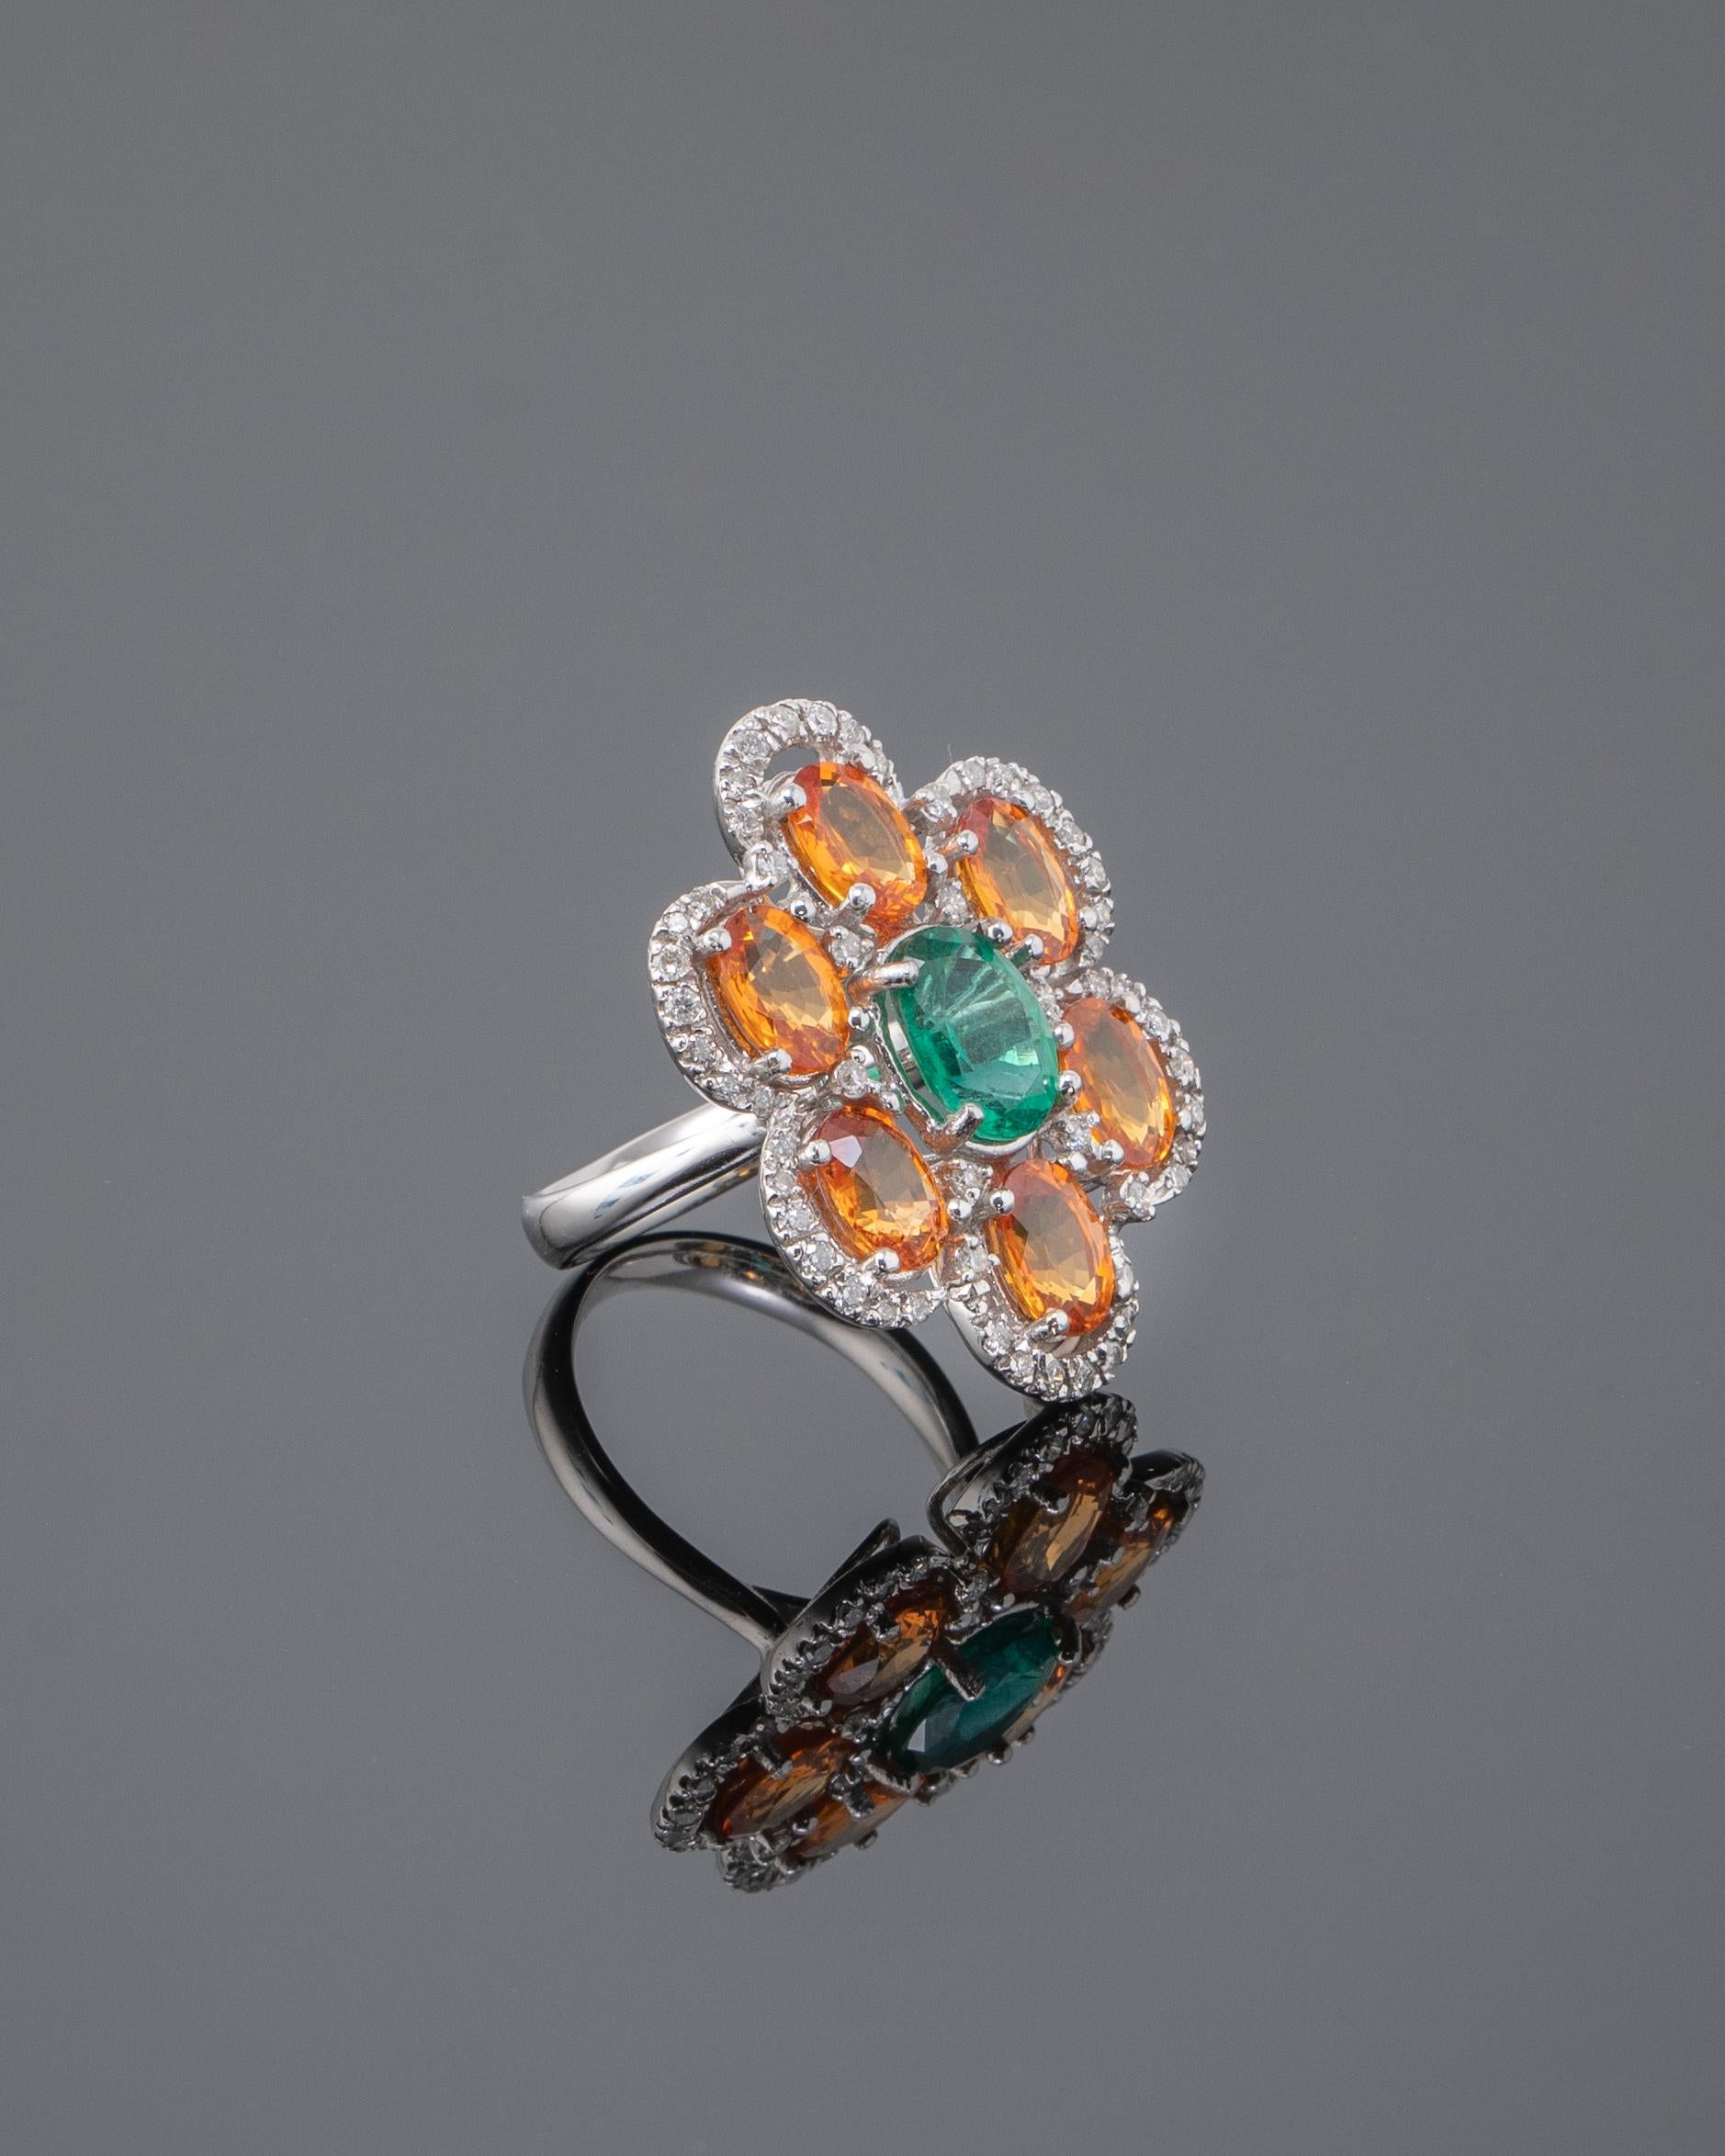 A uniquely designed cocktail ring, made of solid 8.45 grams of 18K White Gold, 6.06 carat Orange Sapphires and a 1.60 carat natural Zambian Emerald centre stone, and 0.68 carat of White Diamond. The stones are completely natural, without any